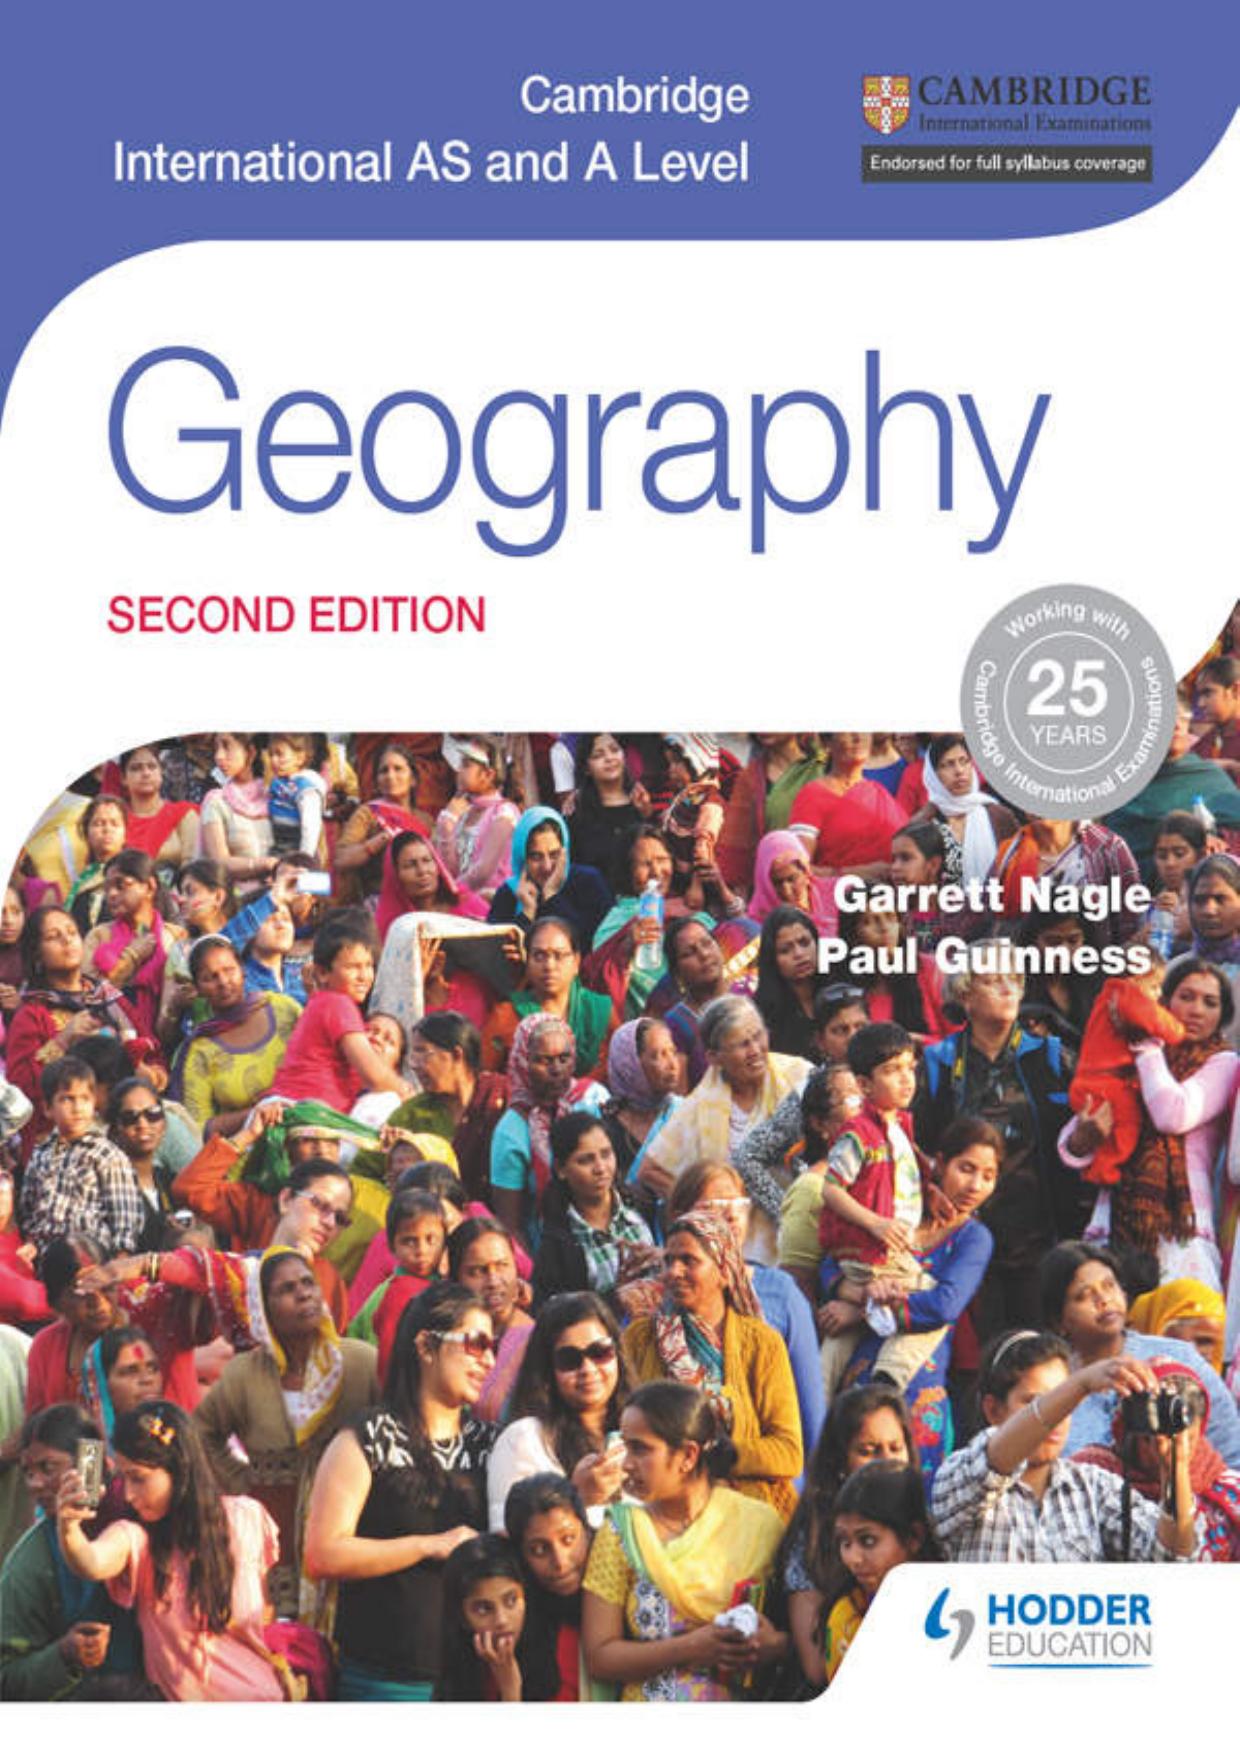 Cambridge International AS and A Level Geography second edition  by Garrett Nagle